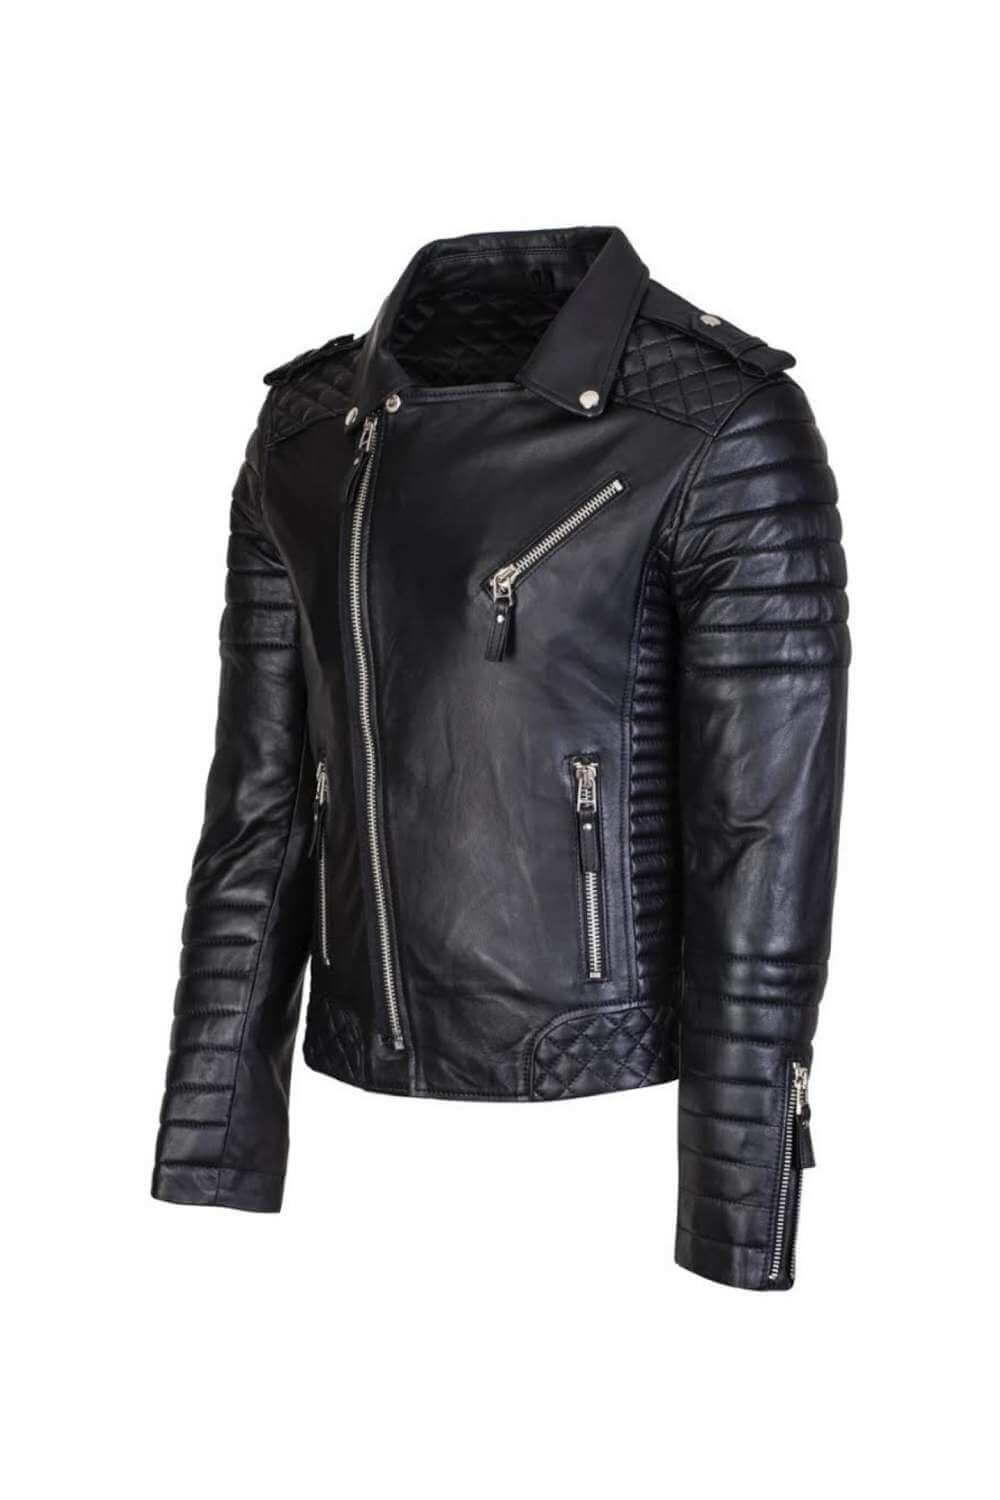 Men's Black Asymmetrical Biker Style Quilted Leather Jacket | Throblife